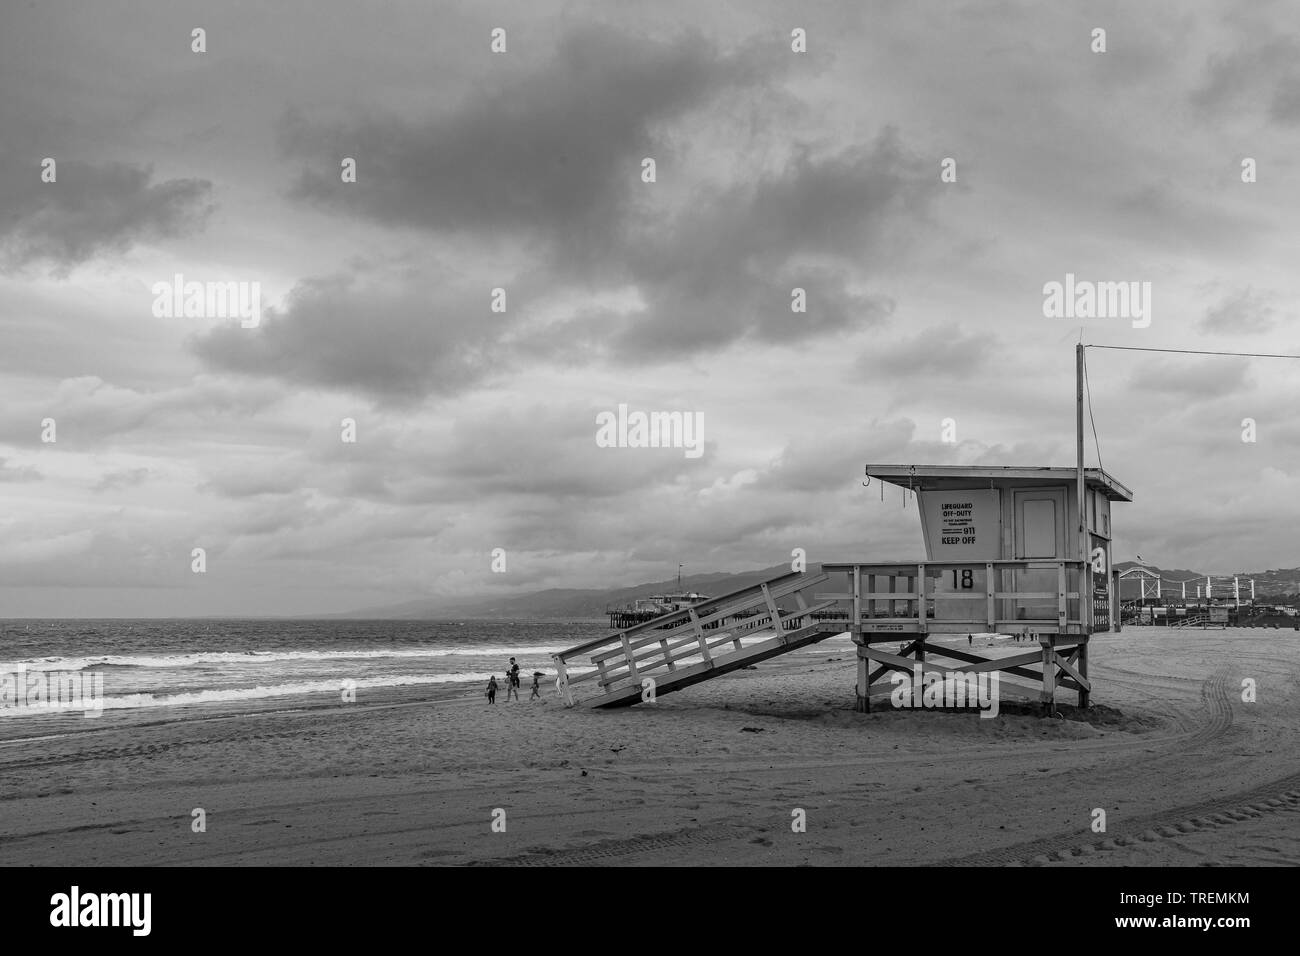 Los Angeles Beach On A Cloudy Day Stock Photo